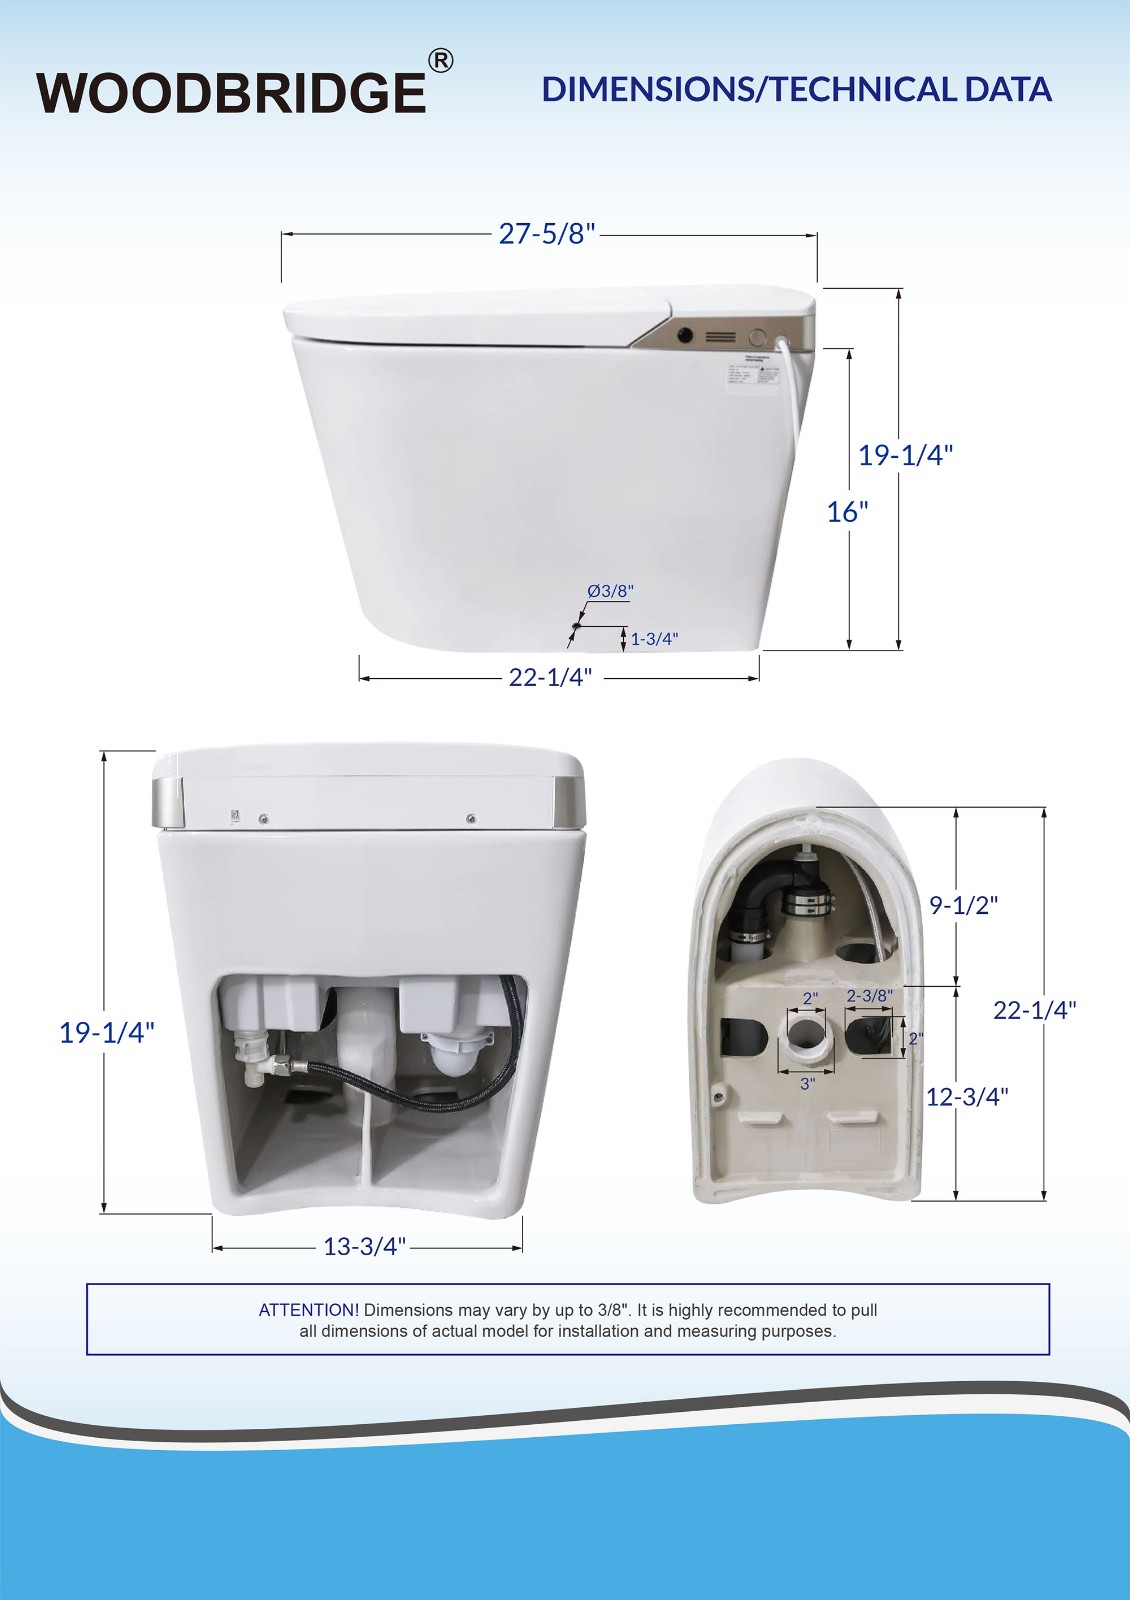  WOODBRIDGE B0980S Intelligent Smart Toilet, Massage Washing, Open & Close, Auto Flush,Heated Integrated Multi Function Remote Control, with Advance Bidet and Soft Closing Seat, White_5969